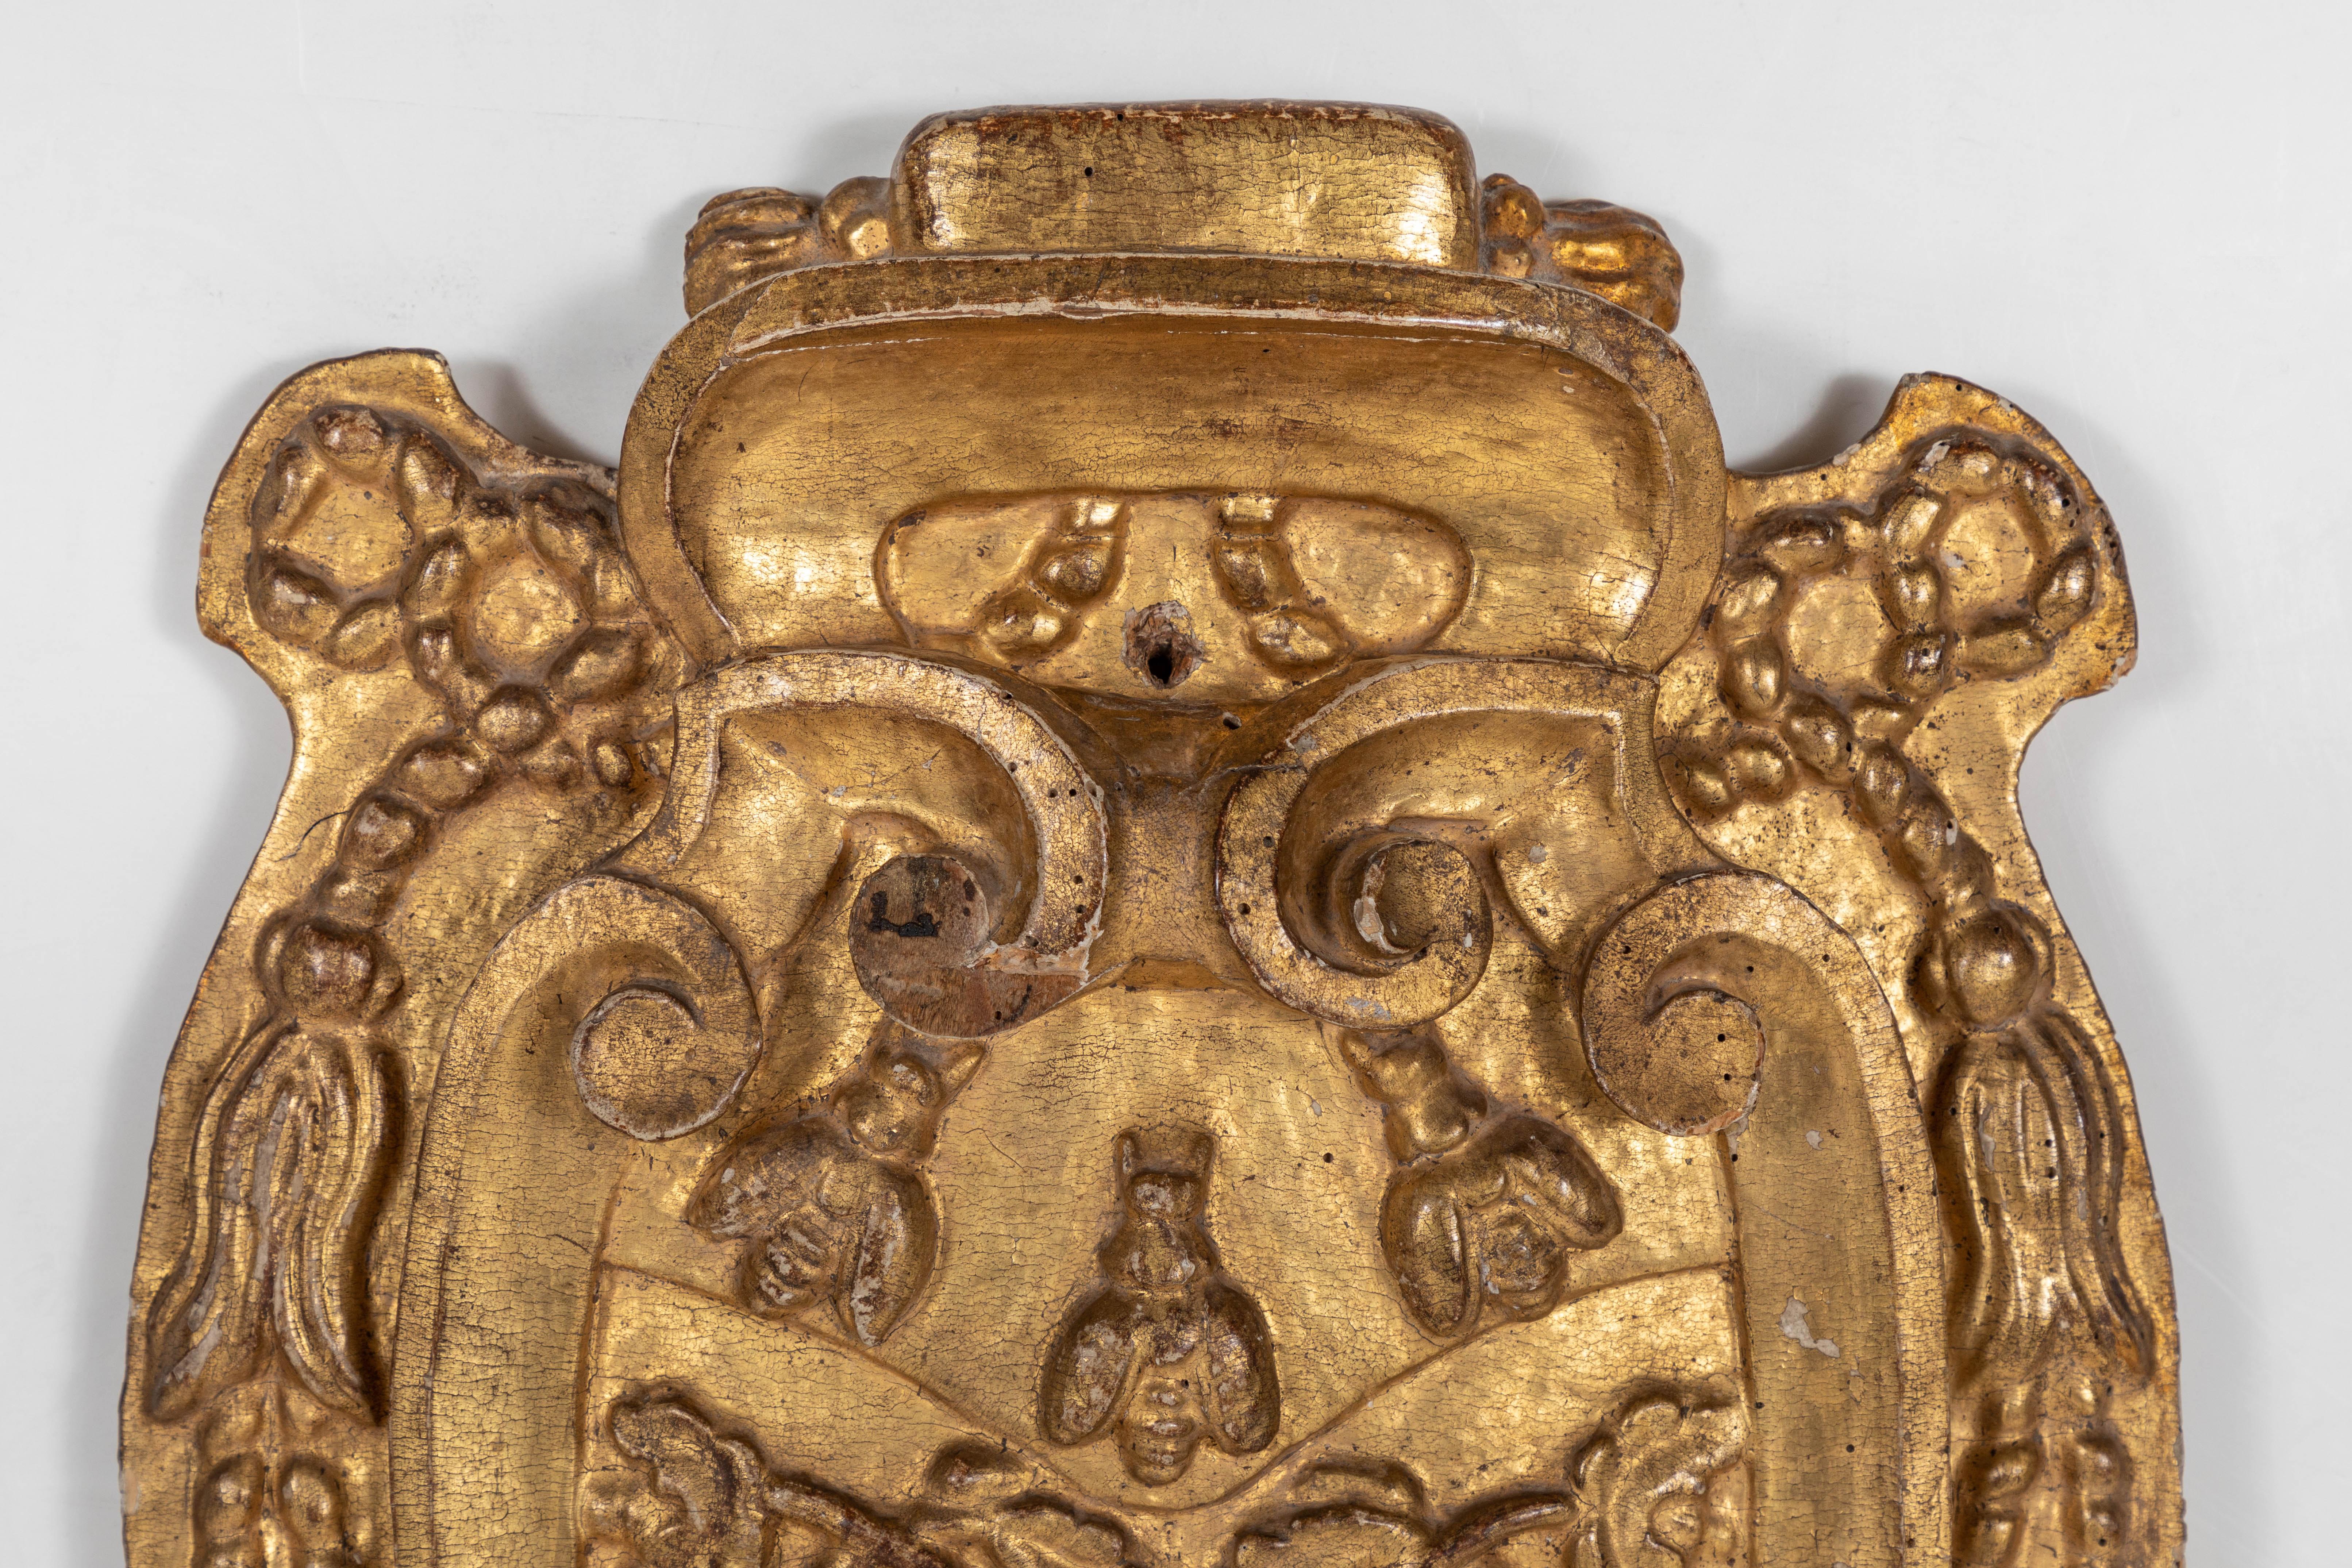 Relief carved, gessoed and 22-karat gold gilded, Italian bishop's crest featuring three bees amidst foliate scrolls, drapery swags, and tassles.